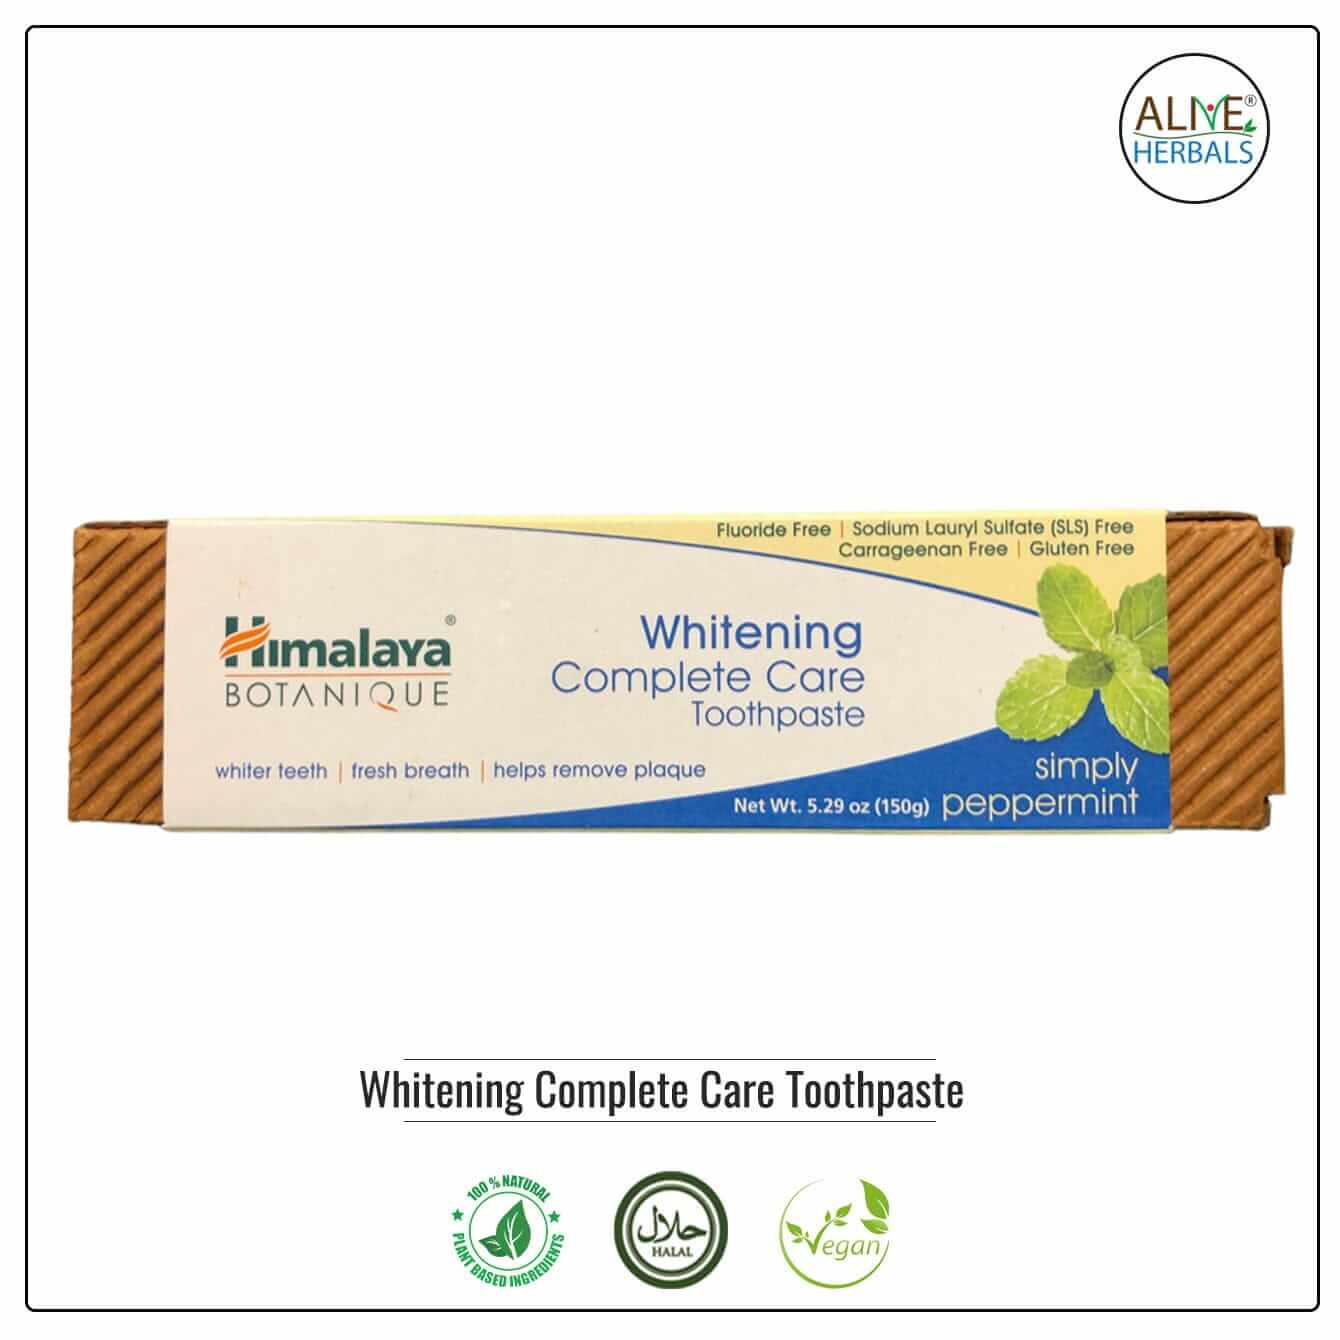 Whitening Complete Care Toothpaste  - Buy at Natural Food Store | Alive Herbals.